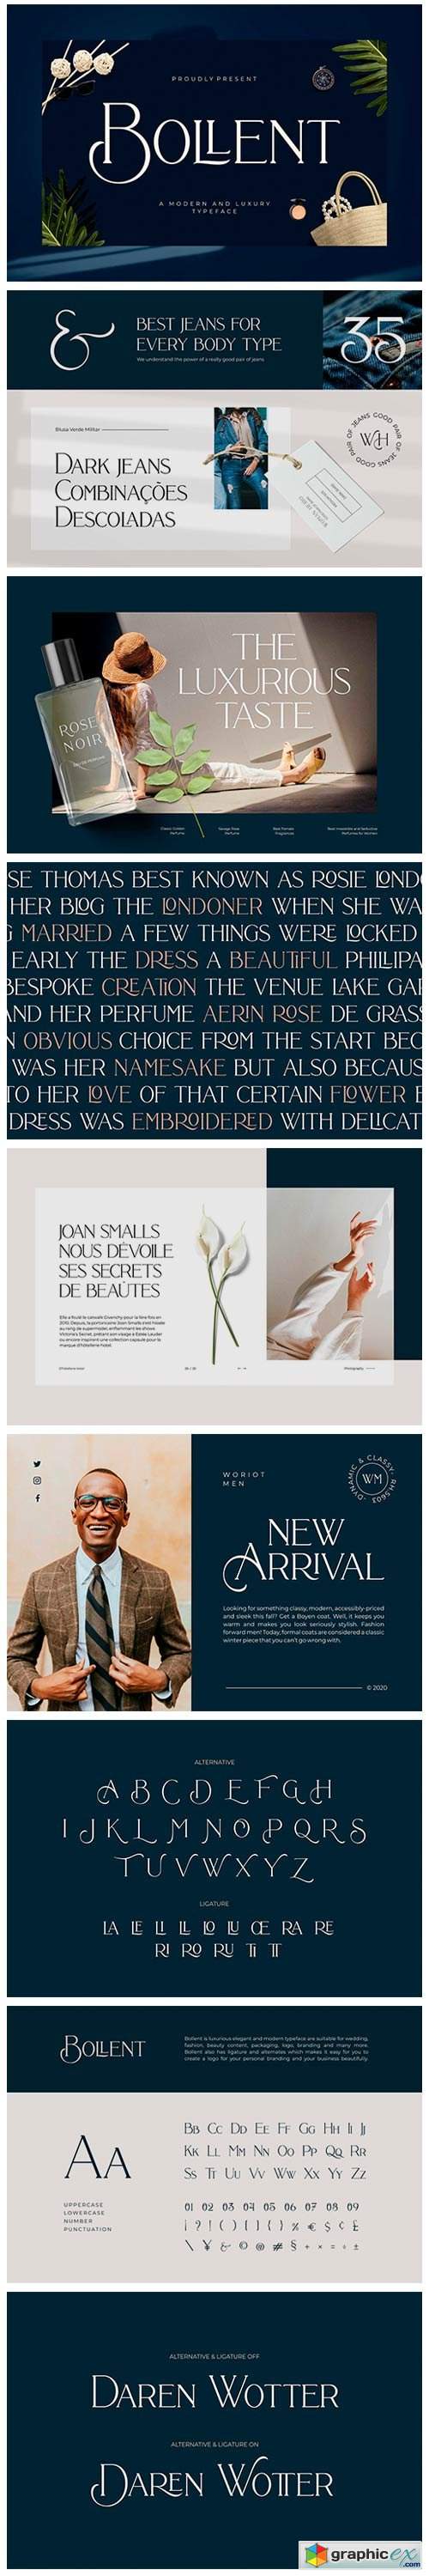 Bollent - Modern And Luxury Typeface 